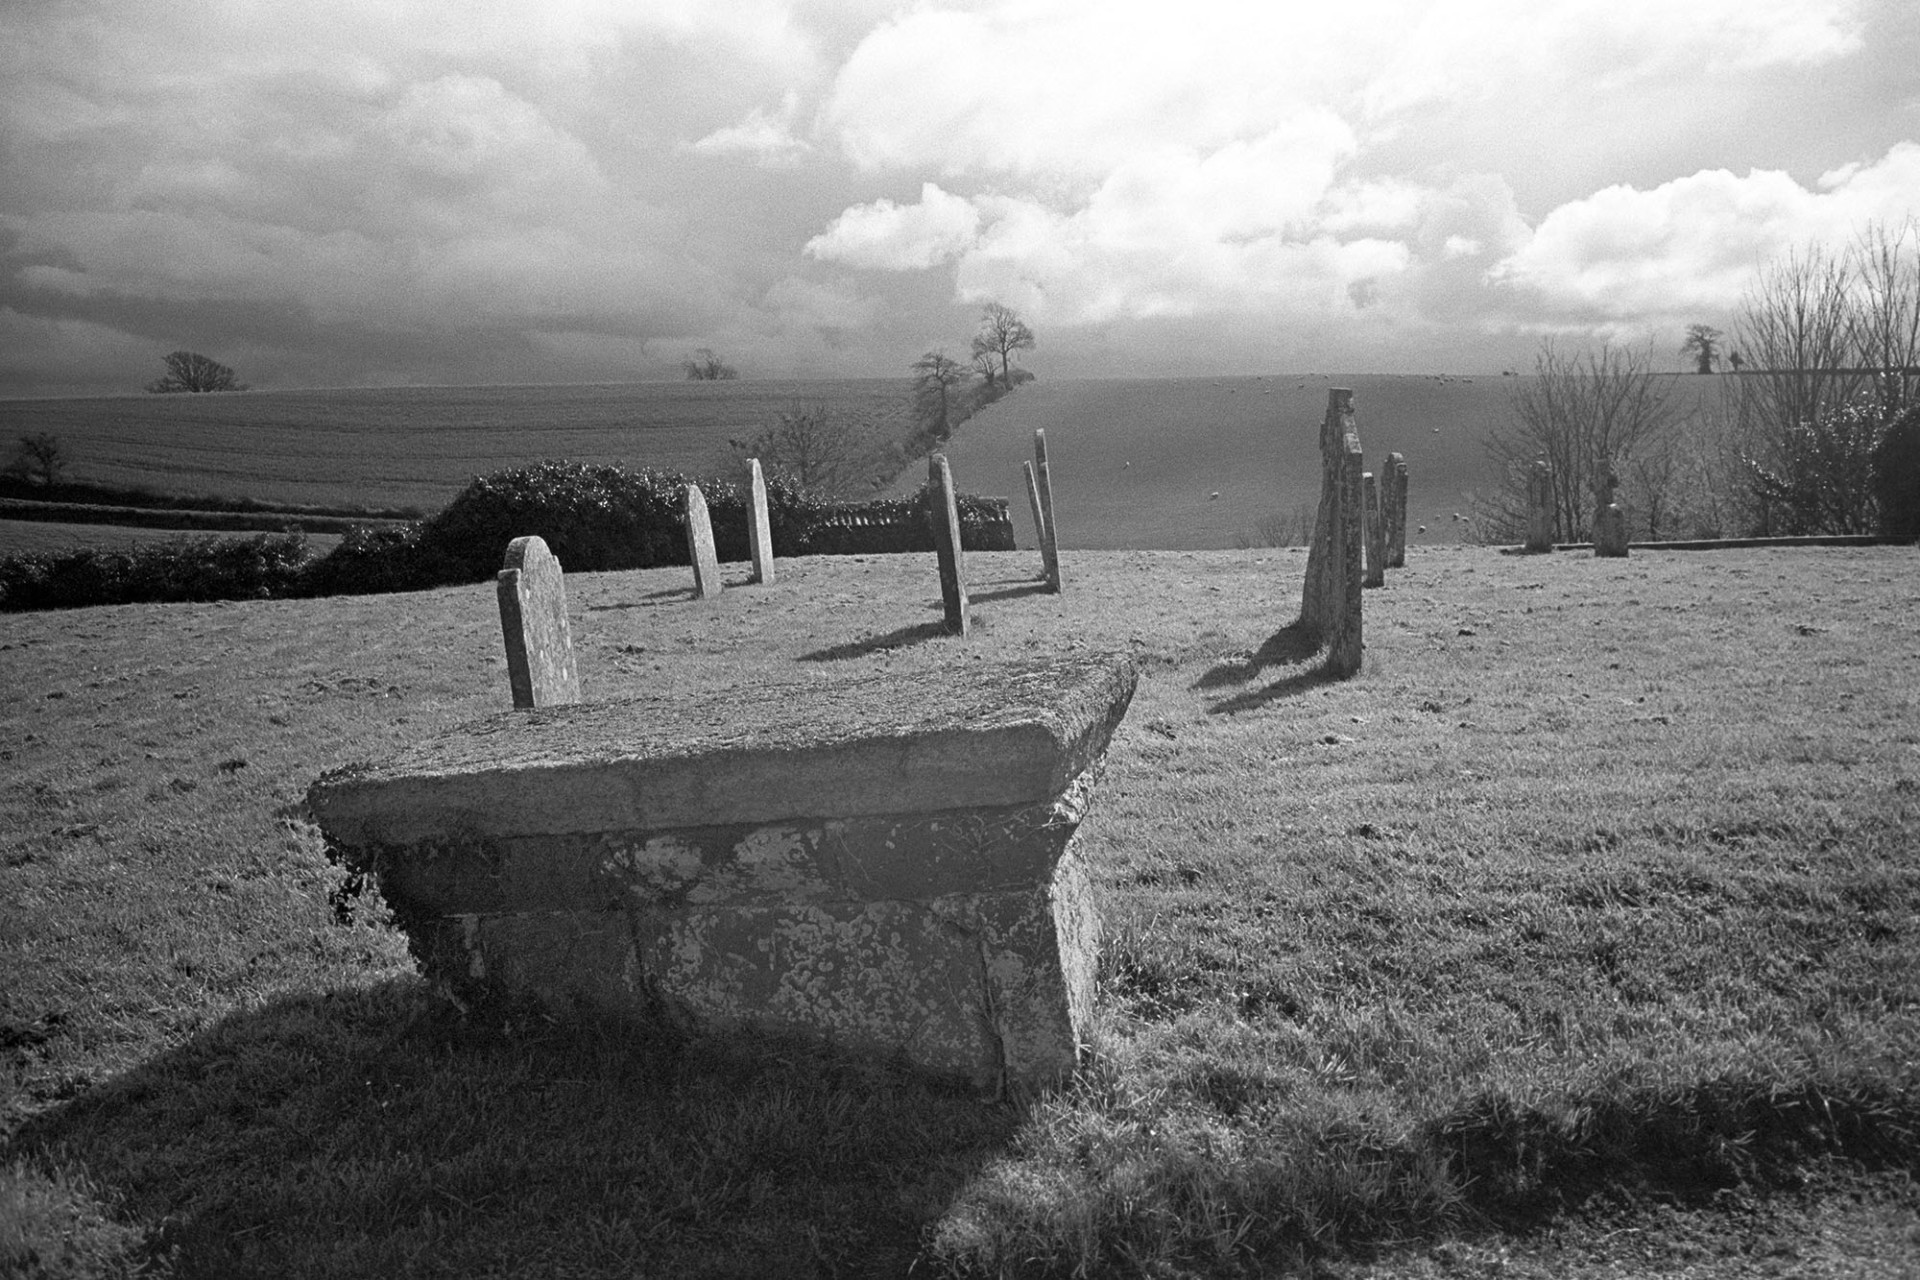 Graveyard with stormy sky, box tomb. 
[A cloudy, stormy sky over Shobrooke churchyard. Gravestone and a box tomb are visible in the churchyard and fields with livestock grazing can be seen in the distance.]